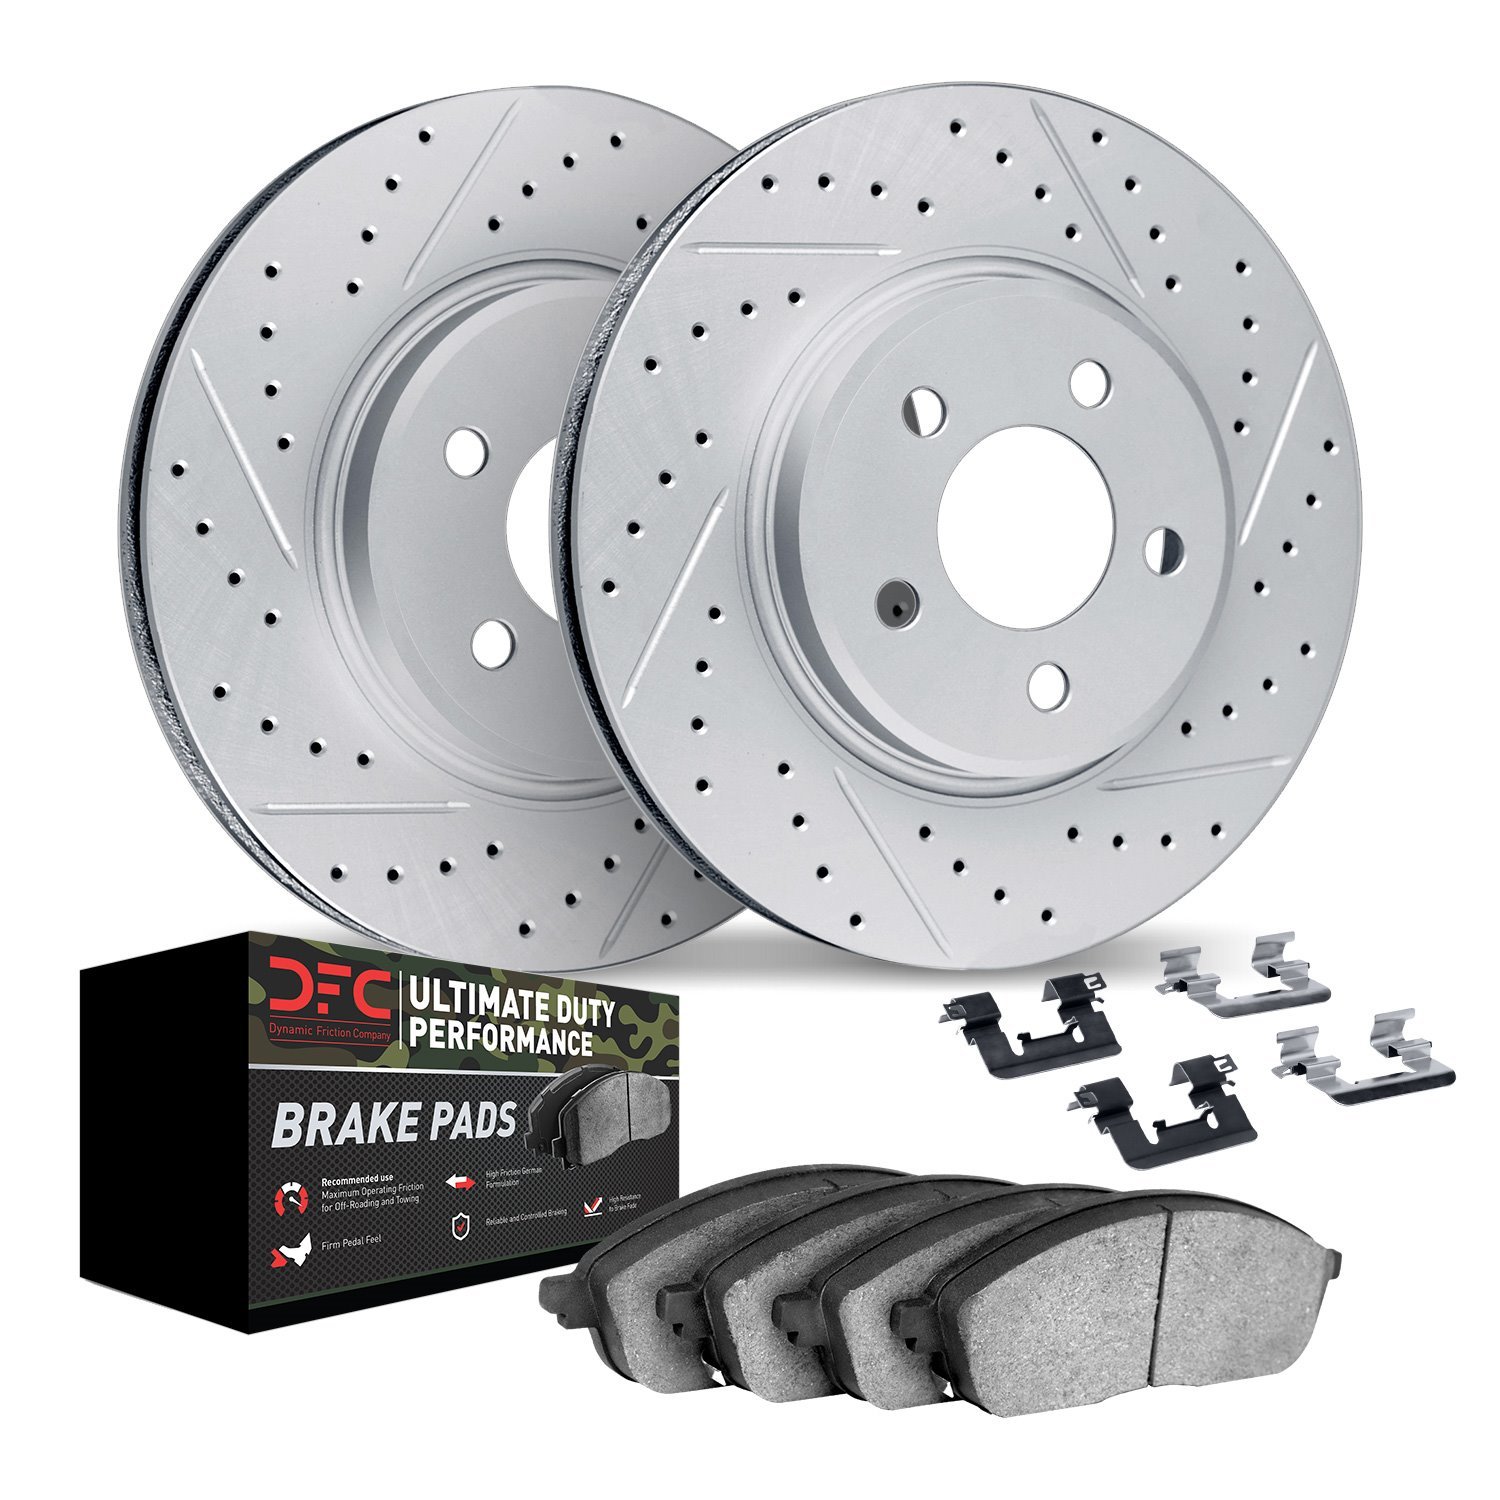 2412-48007 Geoperformance Drilled/Slotted Brake Rotors with Ultimate-Duty Brake Pads Kit & Hardware, 1992-2002 GM, Position: Fro